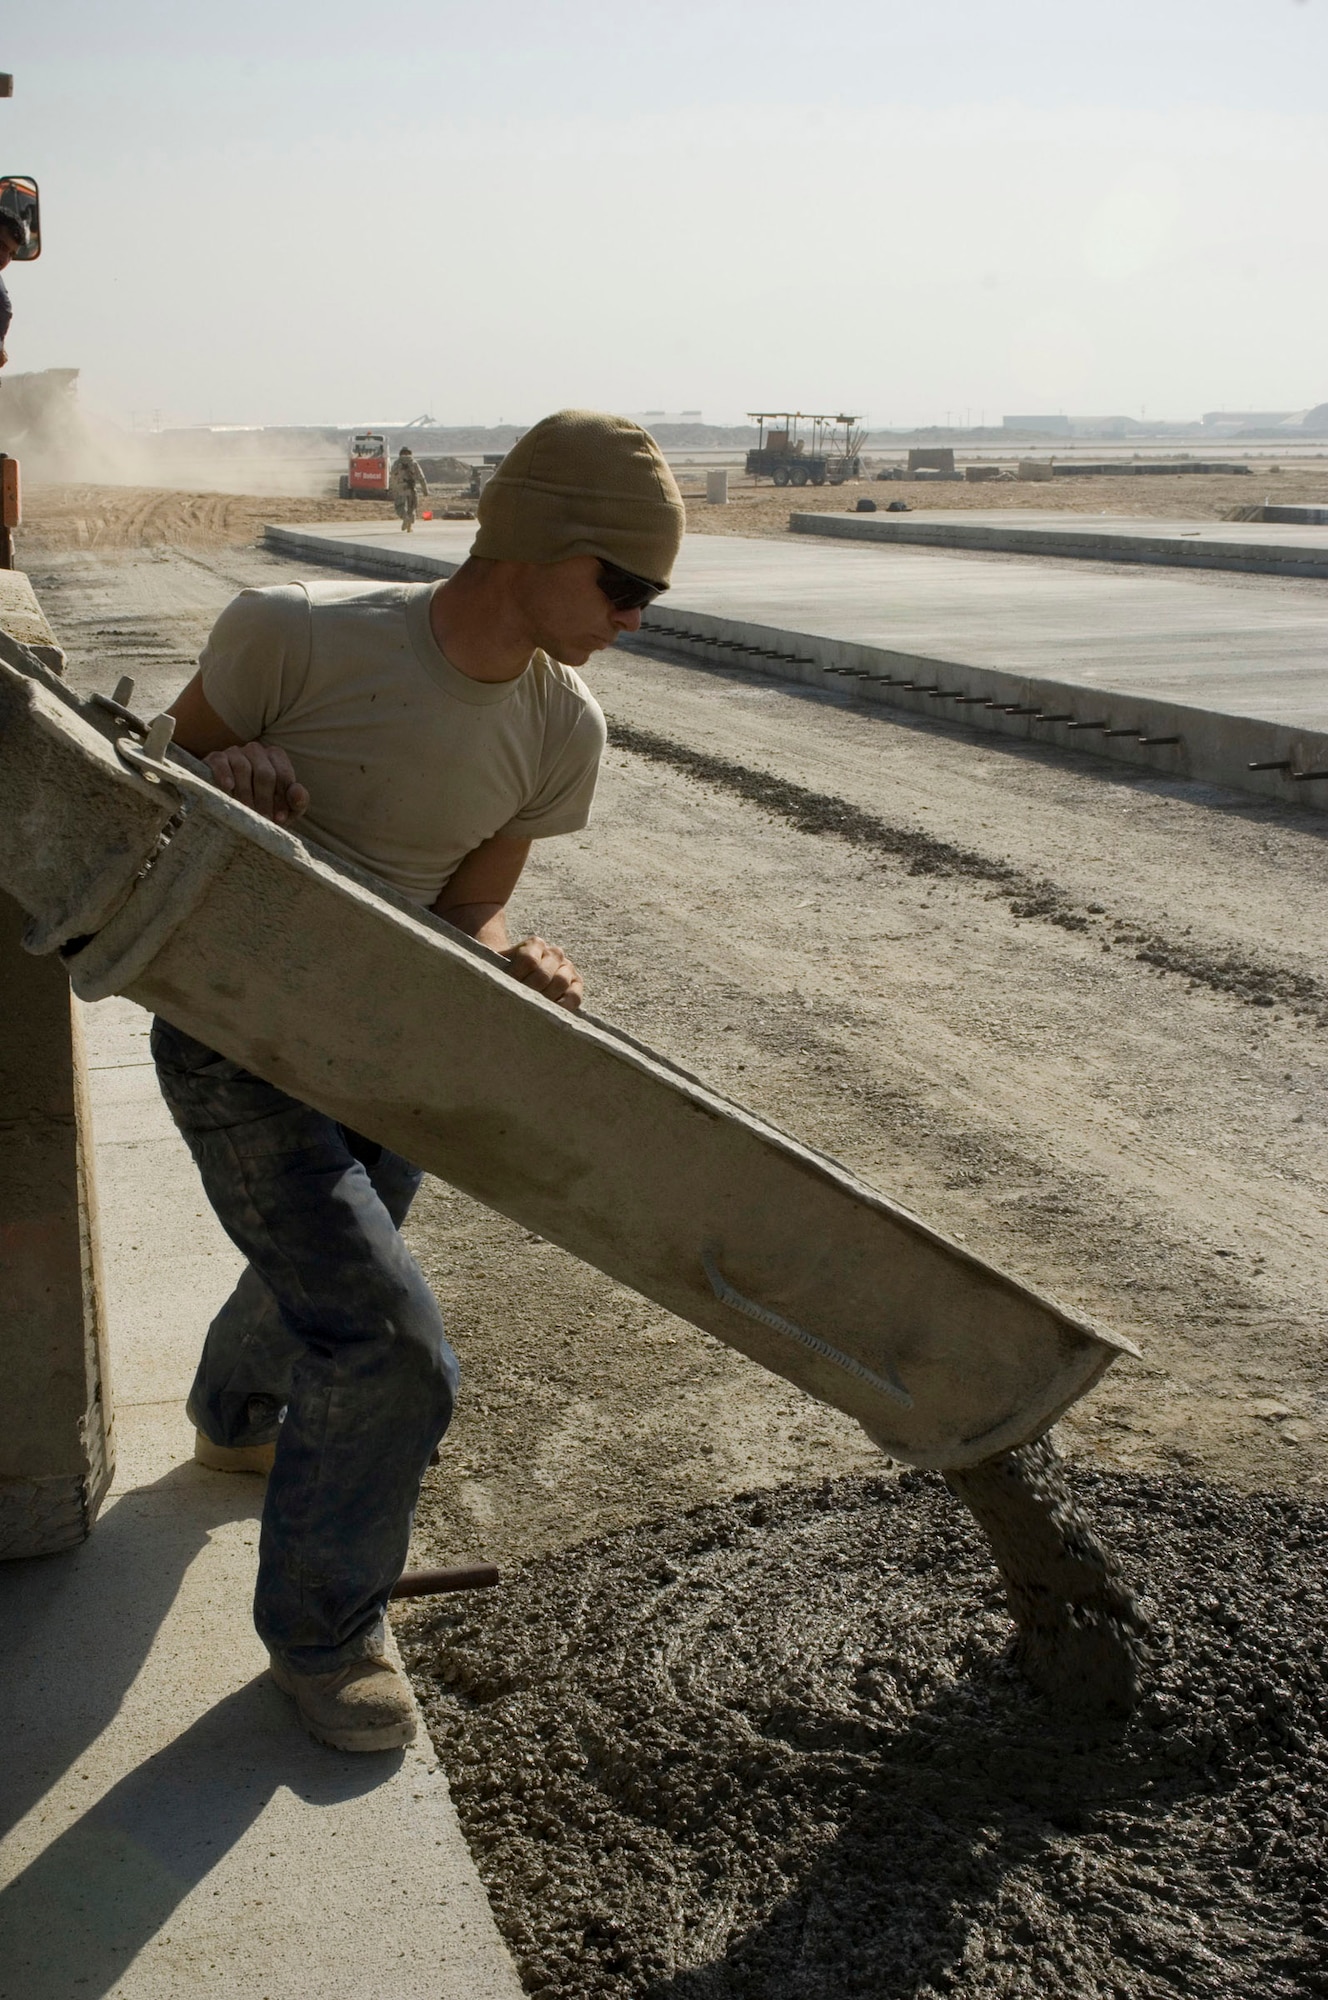 Airman 1st Class Christopher Gaudette, a 455th Expeditionary Civil Engineer Squadron "dirt boy," pours concrete from a truck on the flightline at Bagram Air Field, Afghanistan, Nov. 25. Since August the 455th ECES has poured more than 2,075 cubic meters of concrete as part of construction projects designed to expand the airfield. Airman Gaudette is deployed from Pope Air Force, N.C. (U.S. Air Force photo by Staff Sgt. Rachel Martinez) (Released)